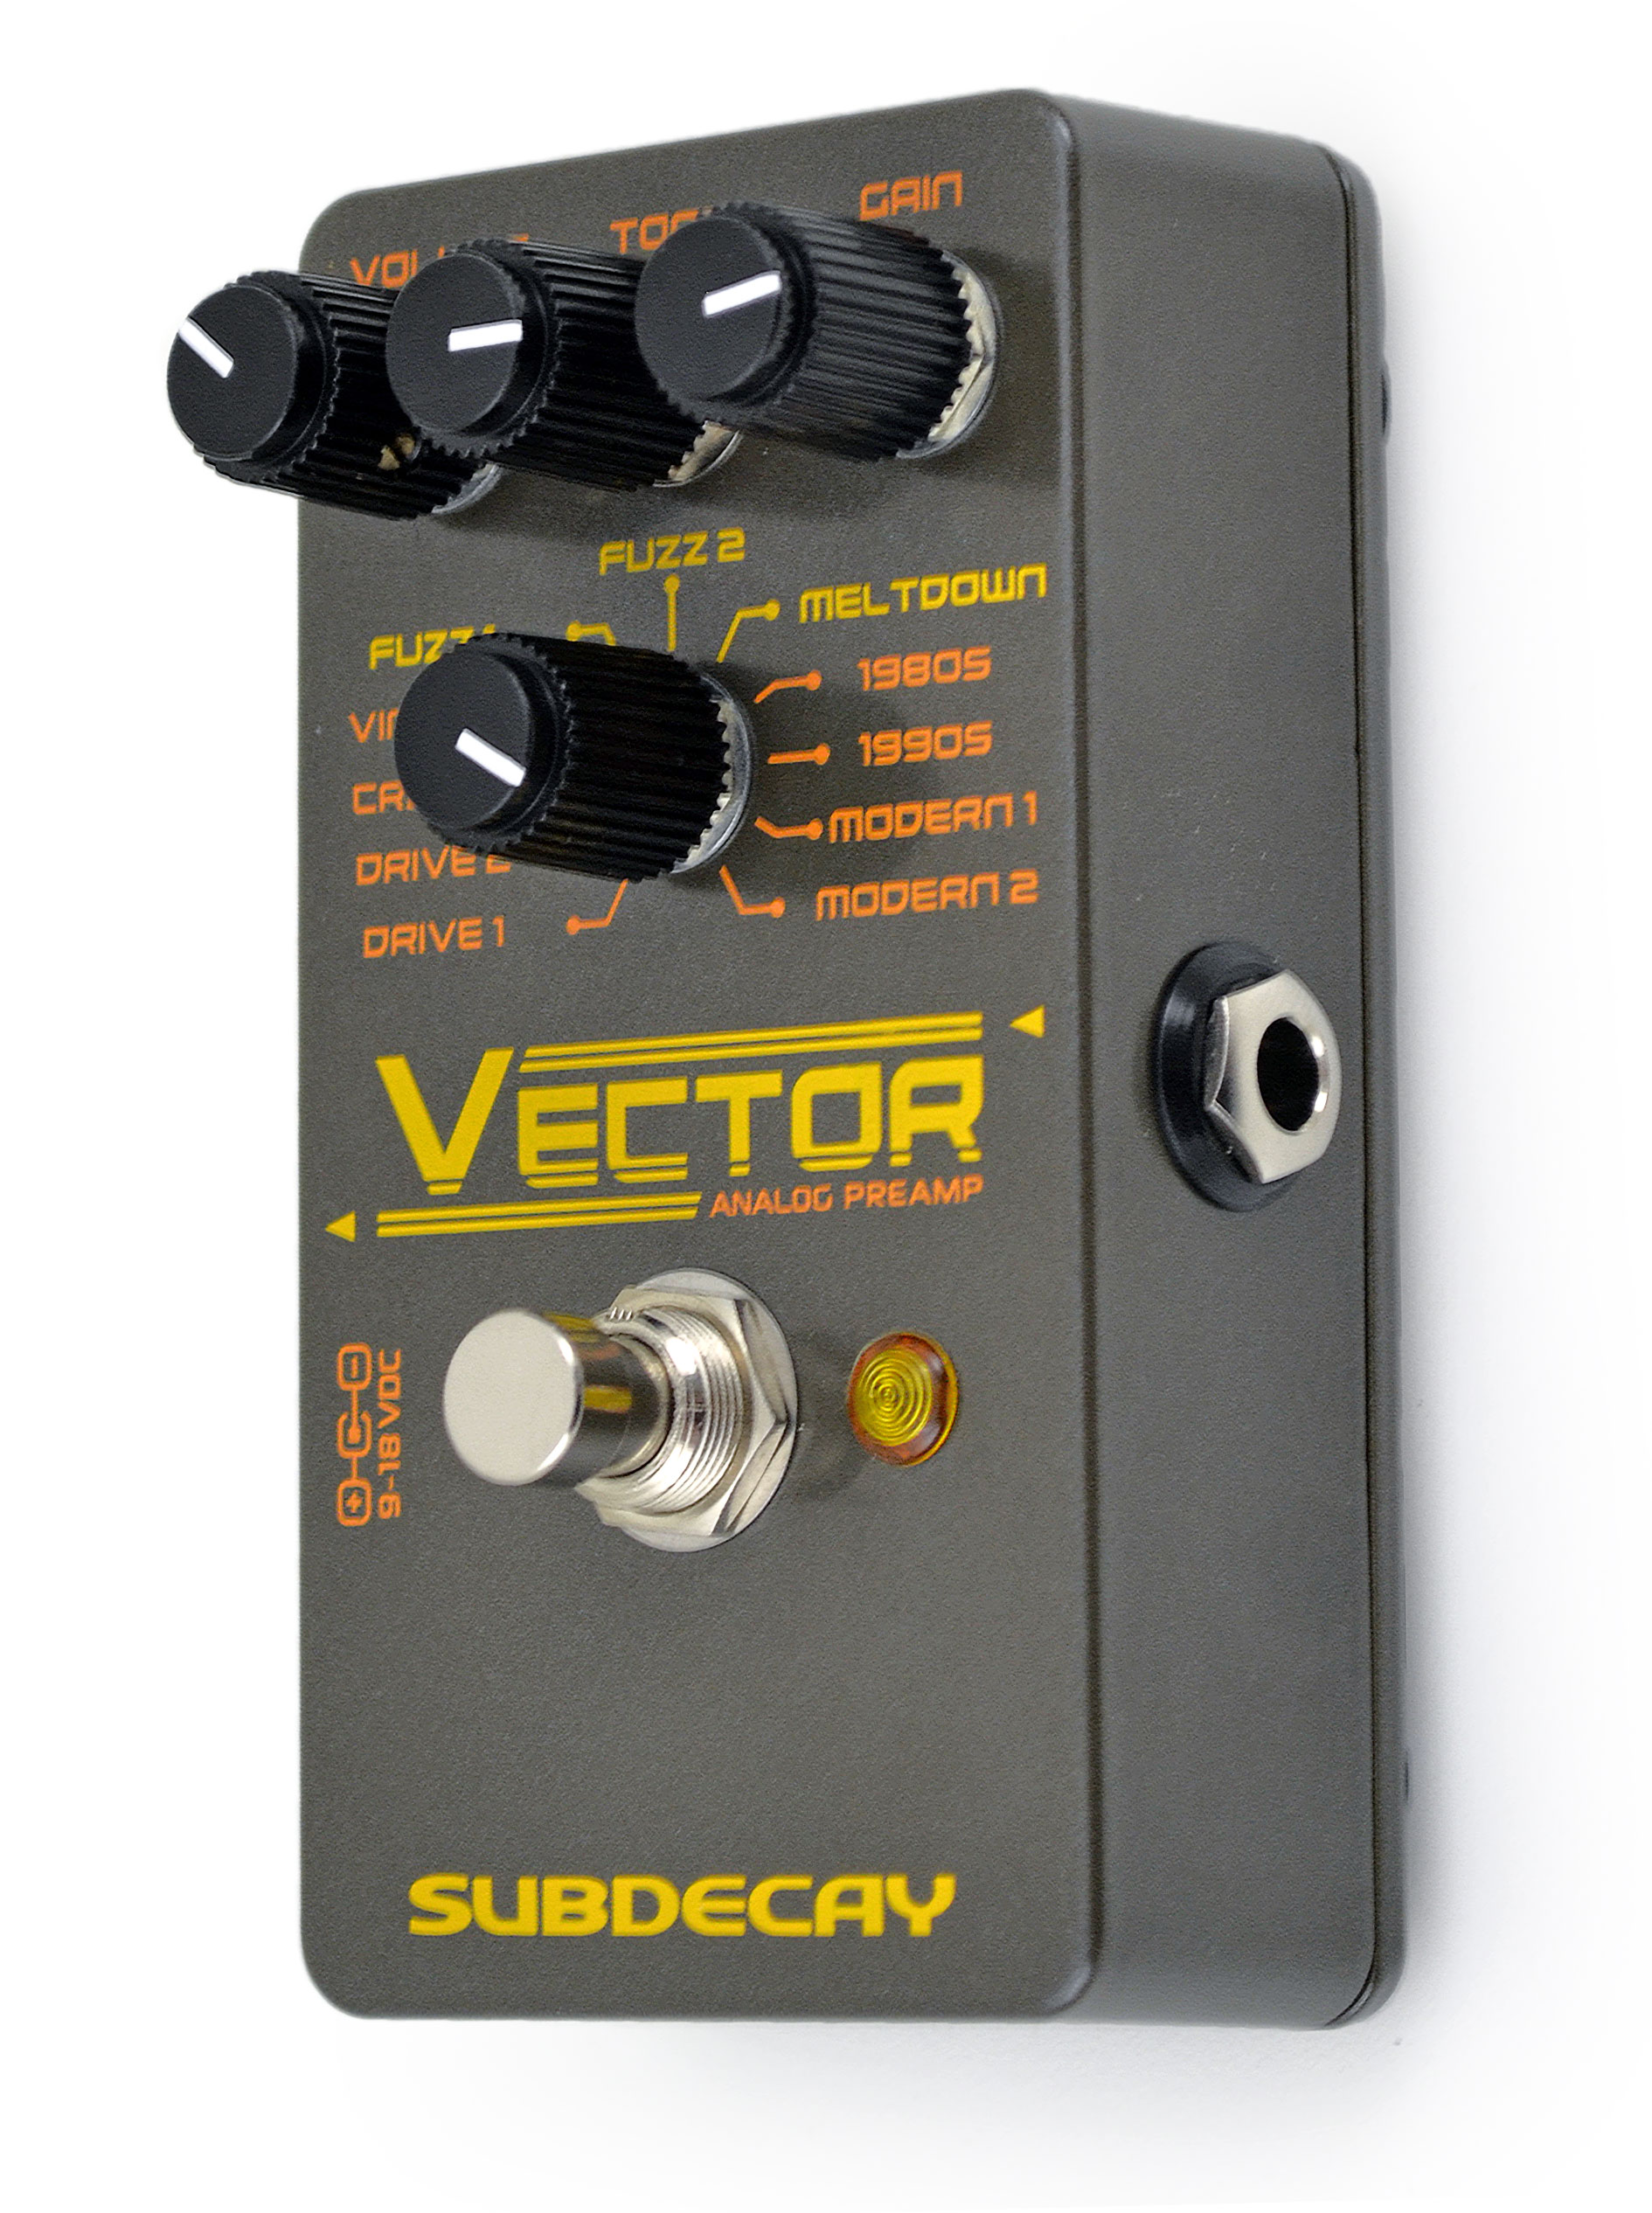 Vector-preamp-1 - Guitar Effects - Subdecay